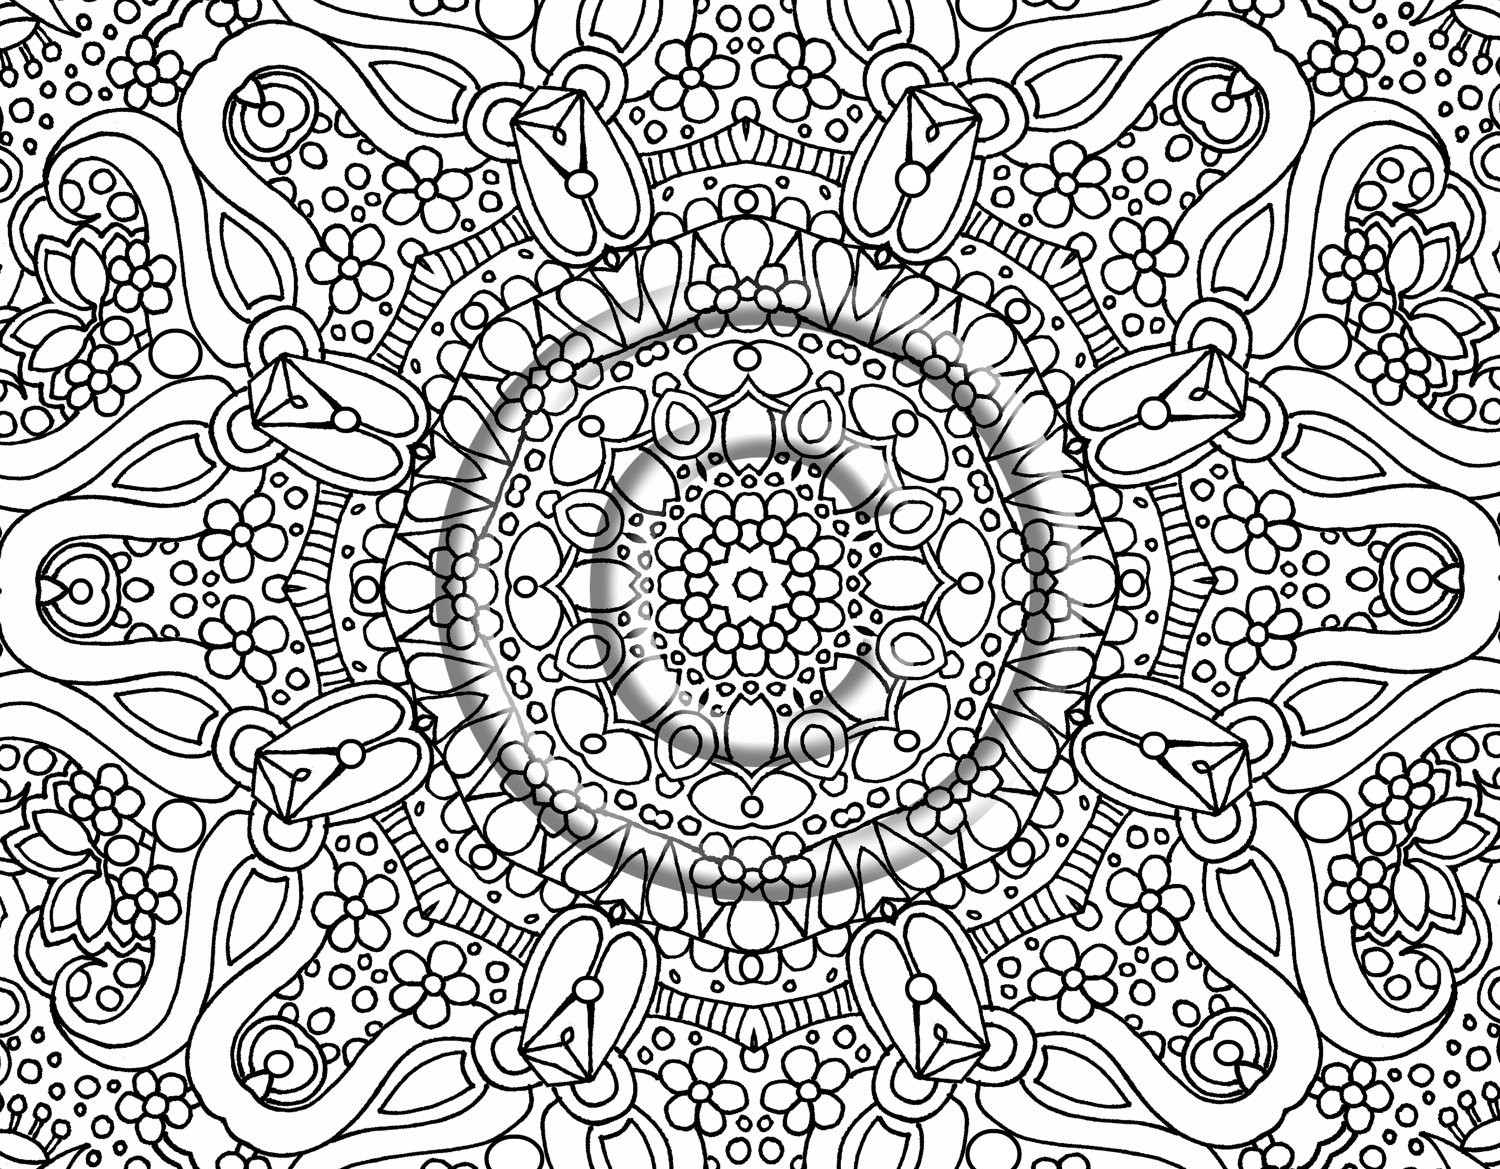 Difficult Coloring Pages For Adults
 Free Printable Abstract Coloring Pages for Adults